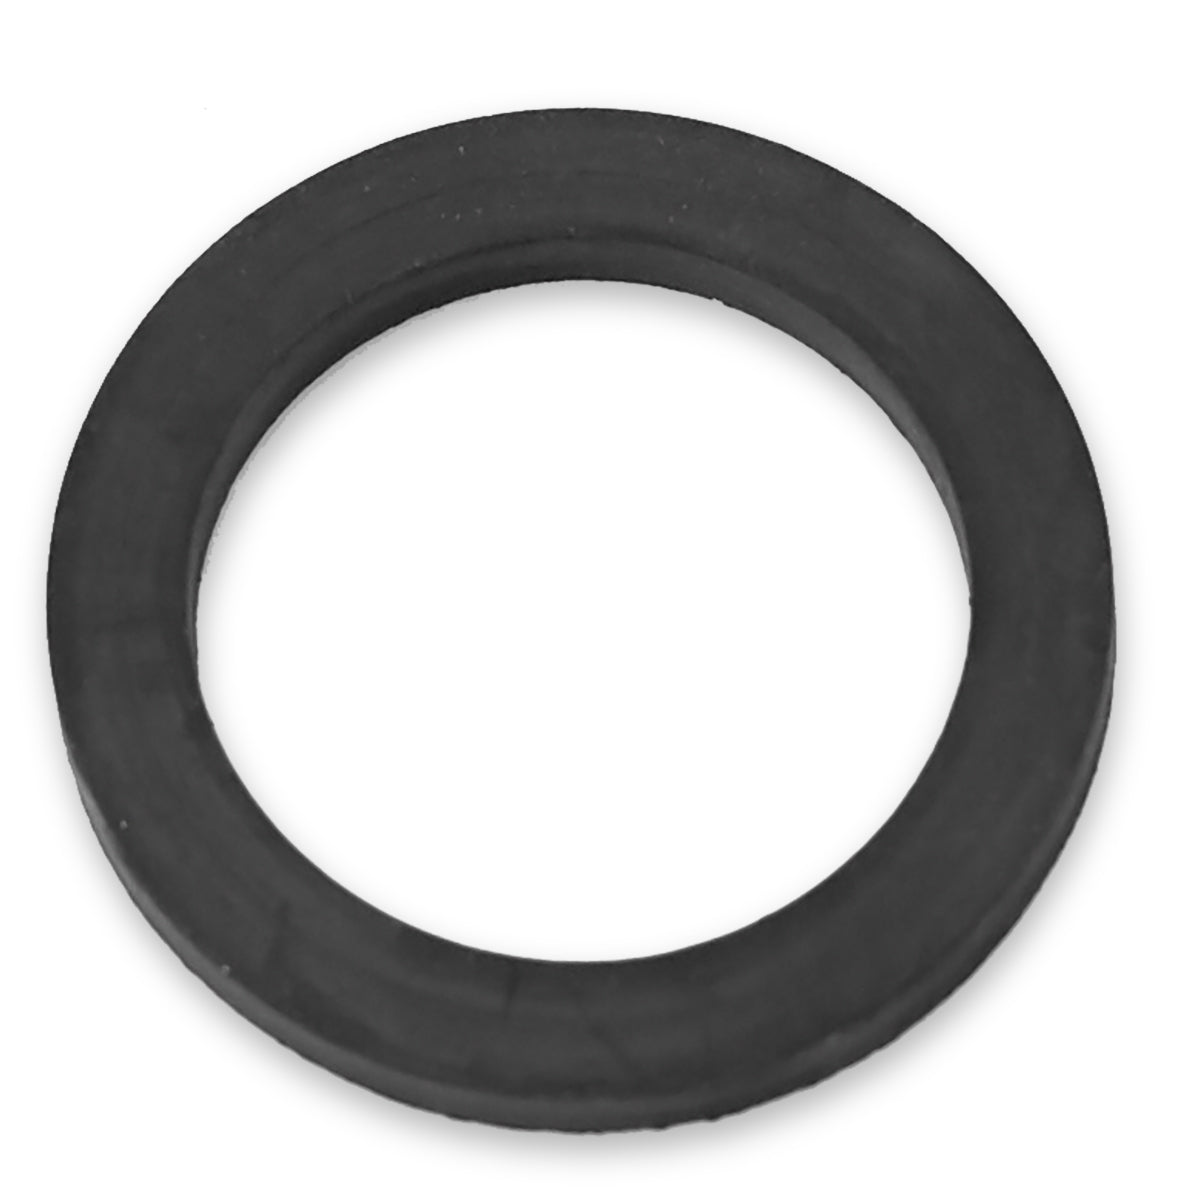 1 1/4" x 1 1/2" O Ring for Quick Lock Coupling